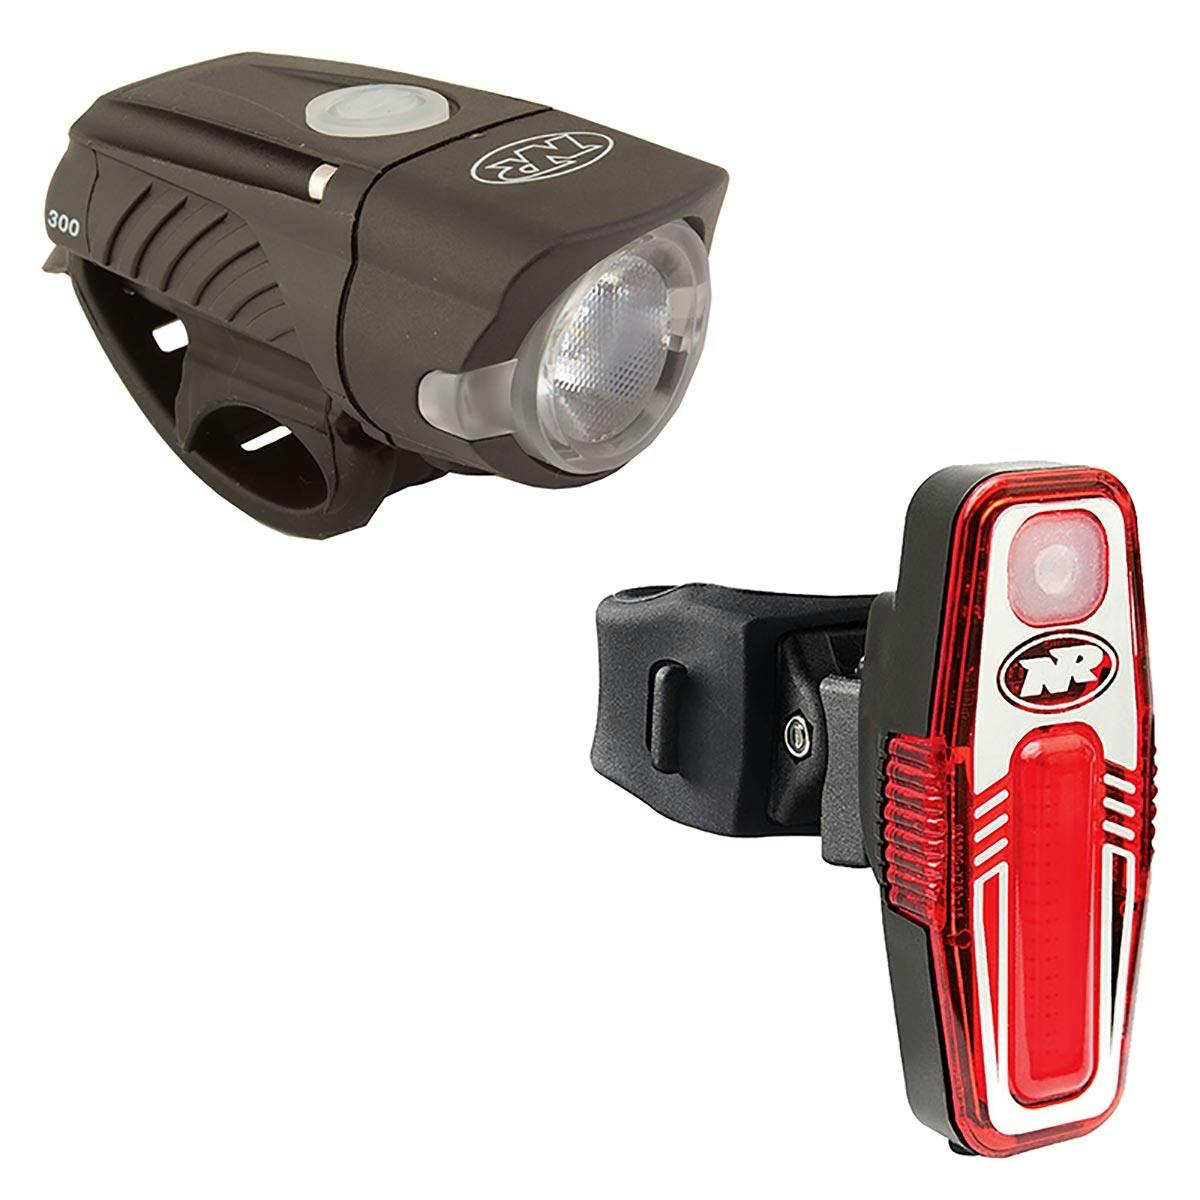 Niterider Swift 300 Head Light w/ Sabre 80 Tail Light Rechargeable Combo - Black